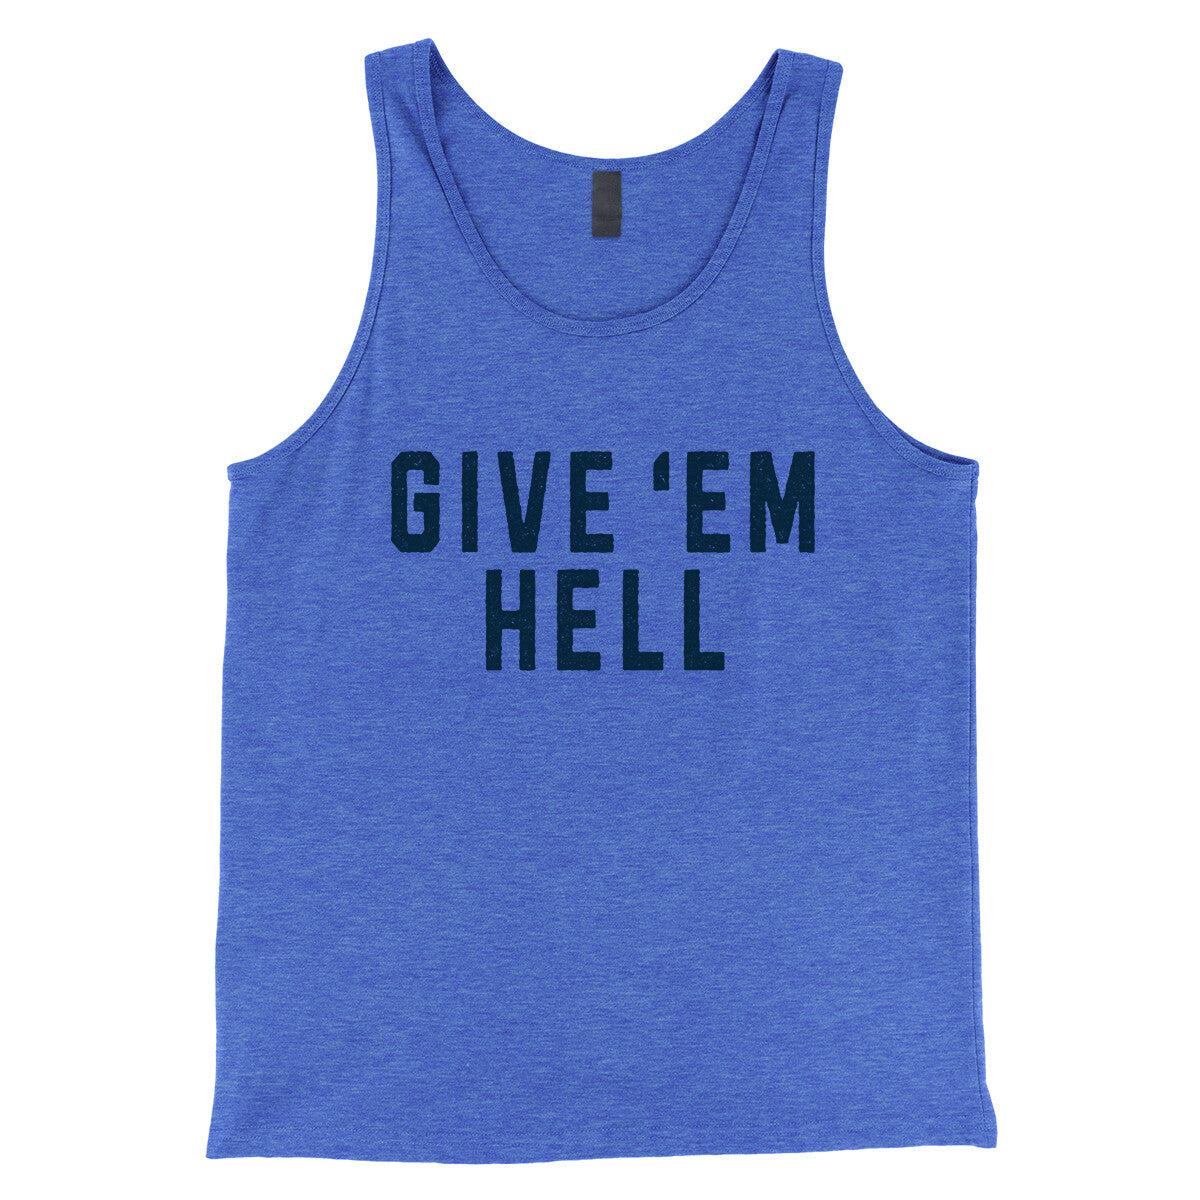 Give ‘em Hell in True Royal TriBlend Color